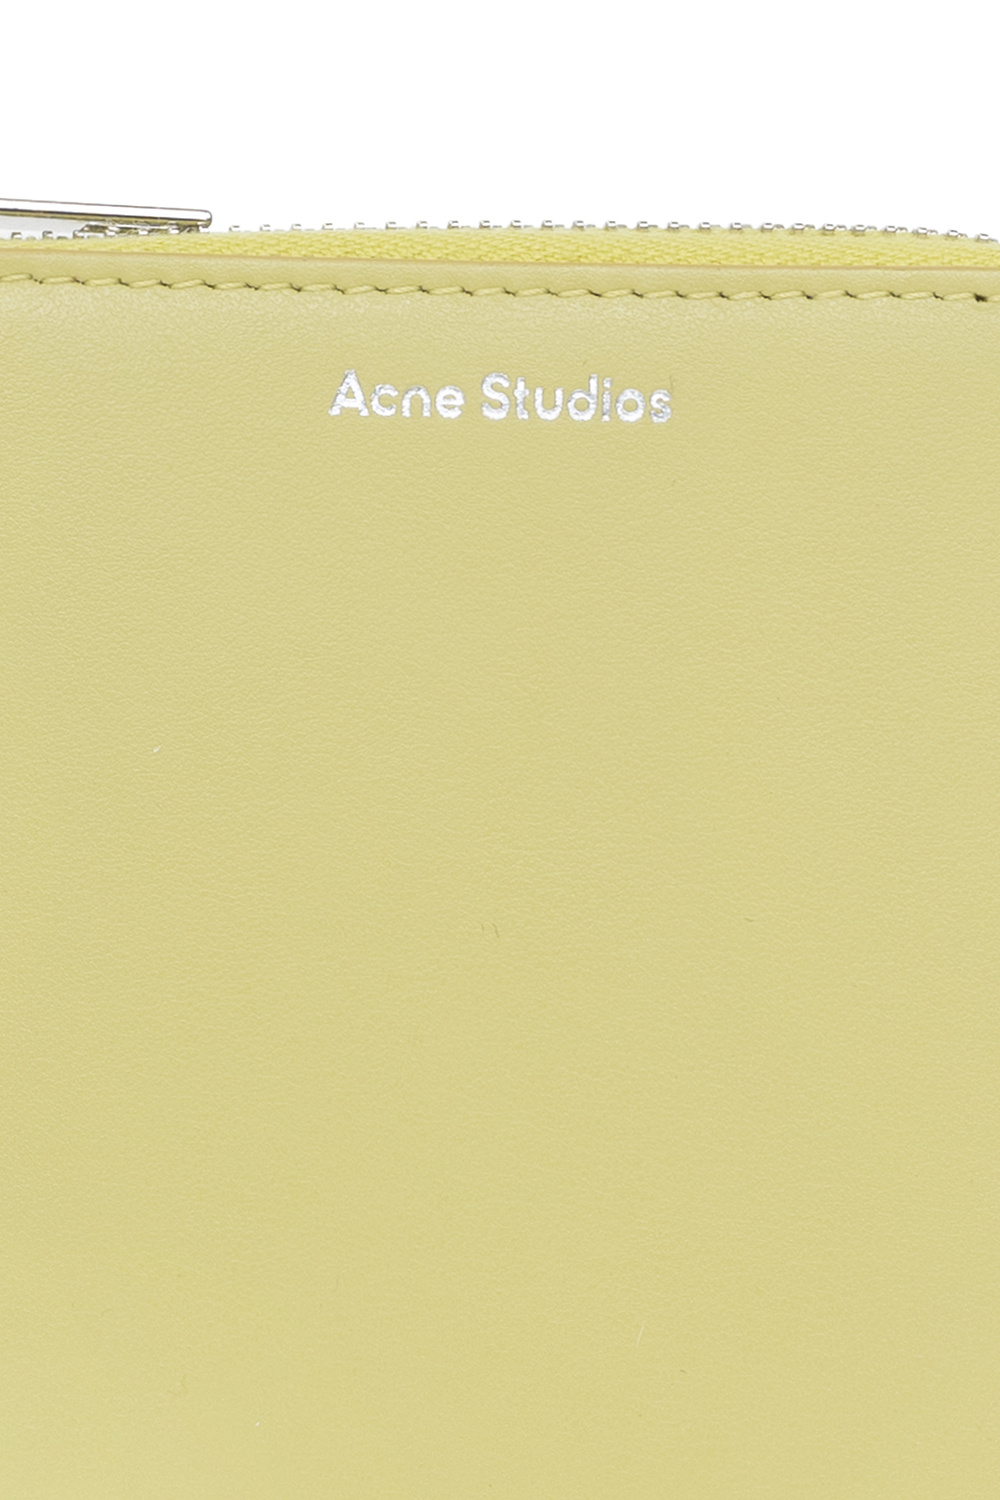 Acne Studios the hottest trend of the season